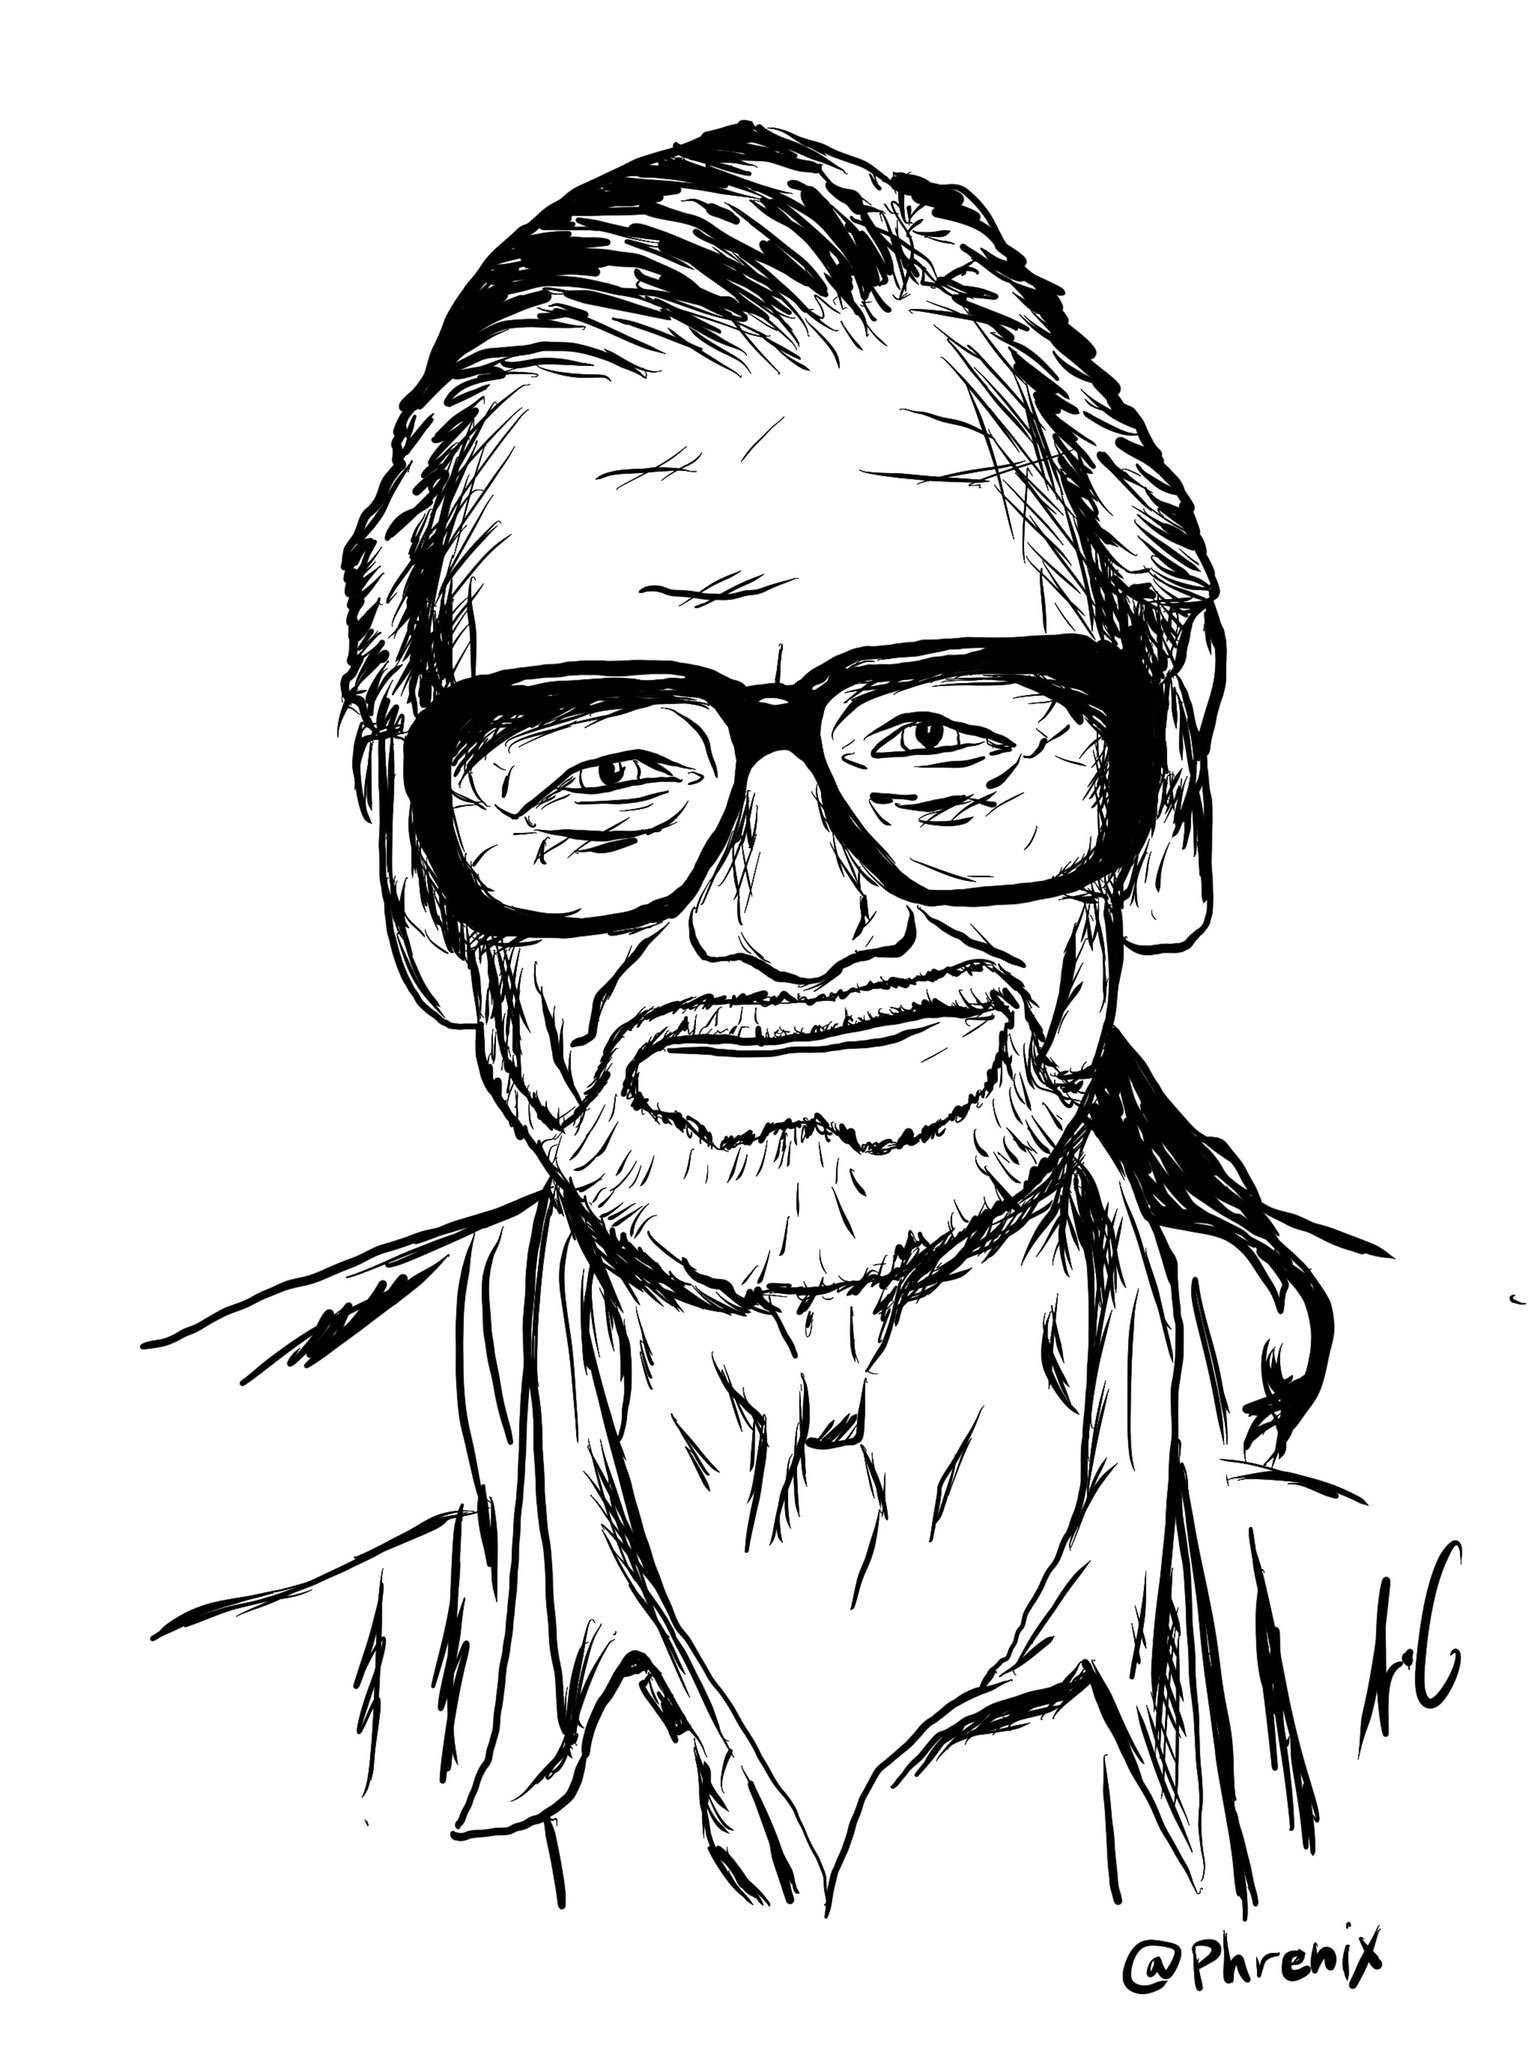 A happy birthday to the legendary godfather of the undead, George A Romero. Missed by all fans. 